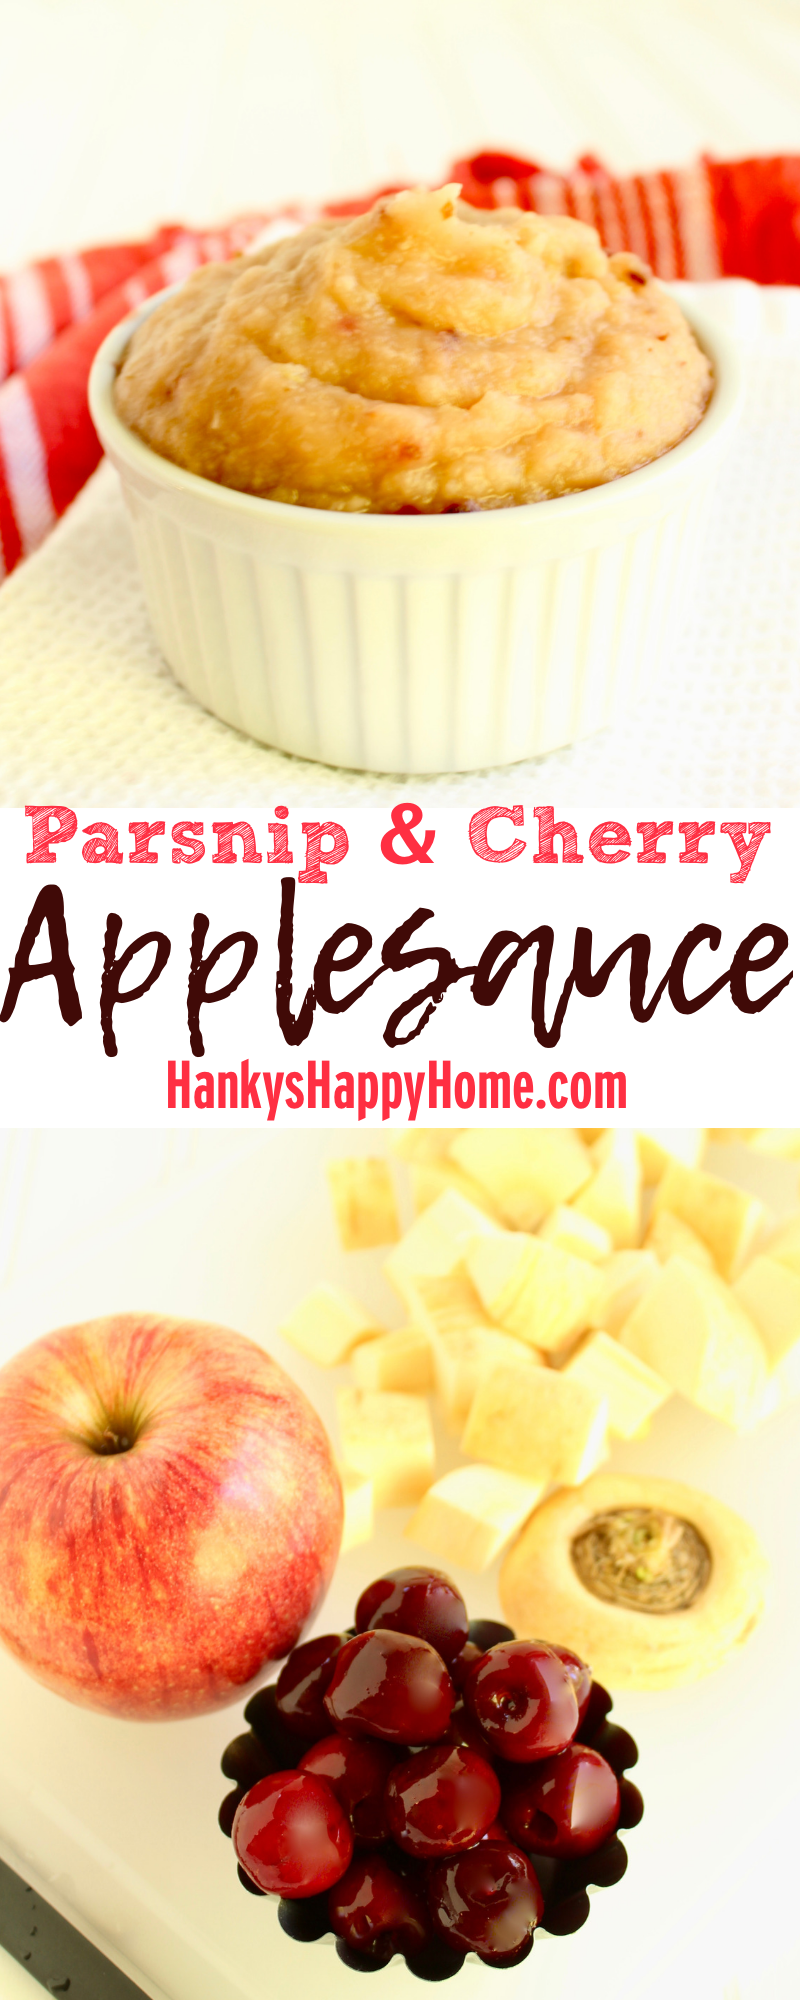 This Parsnip & Cherry Applesauce combines sweet apples and cherries with nutrient-dense parsnips for a perfect addition to lunch or snack time.